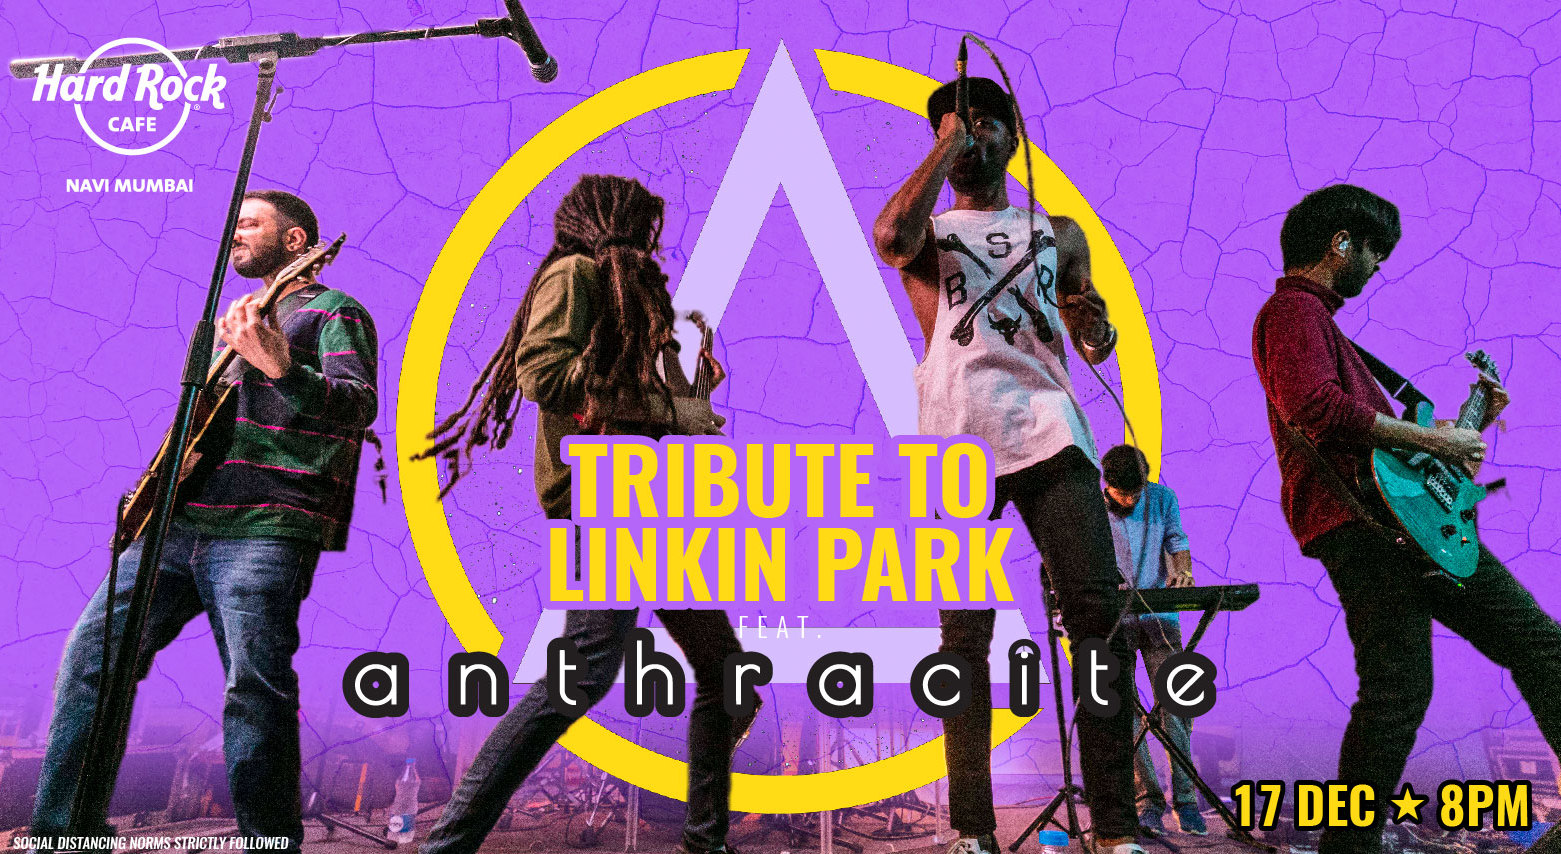 Tribute to Linkin Park ft. Anthracite